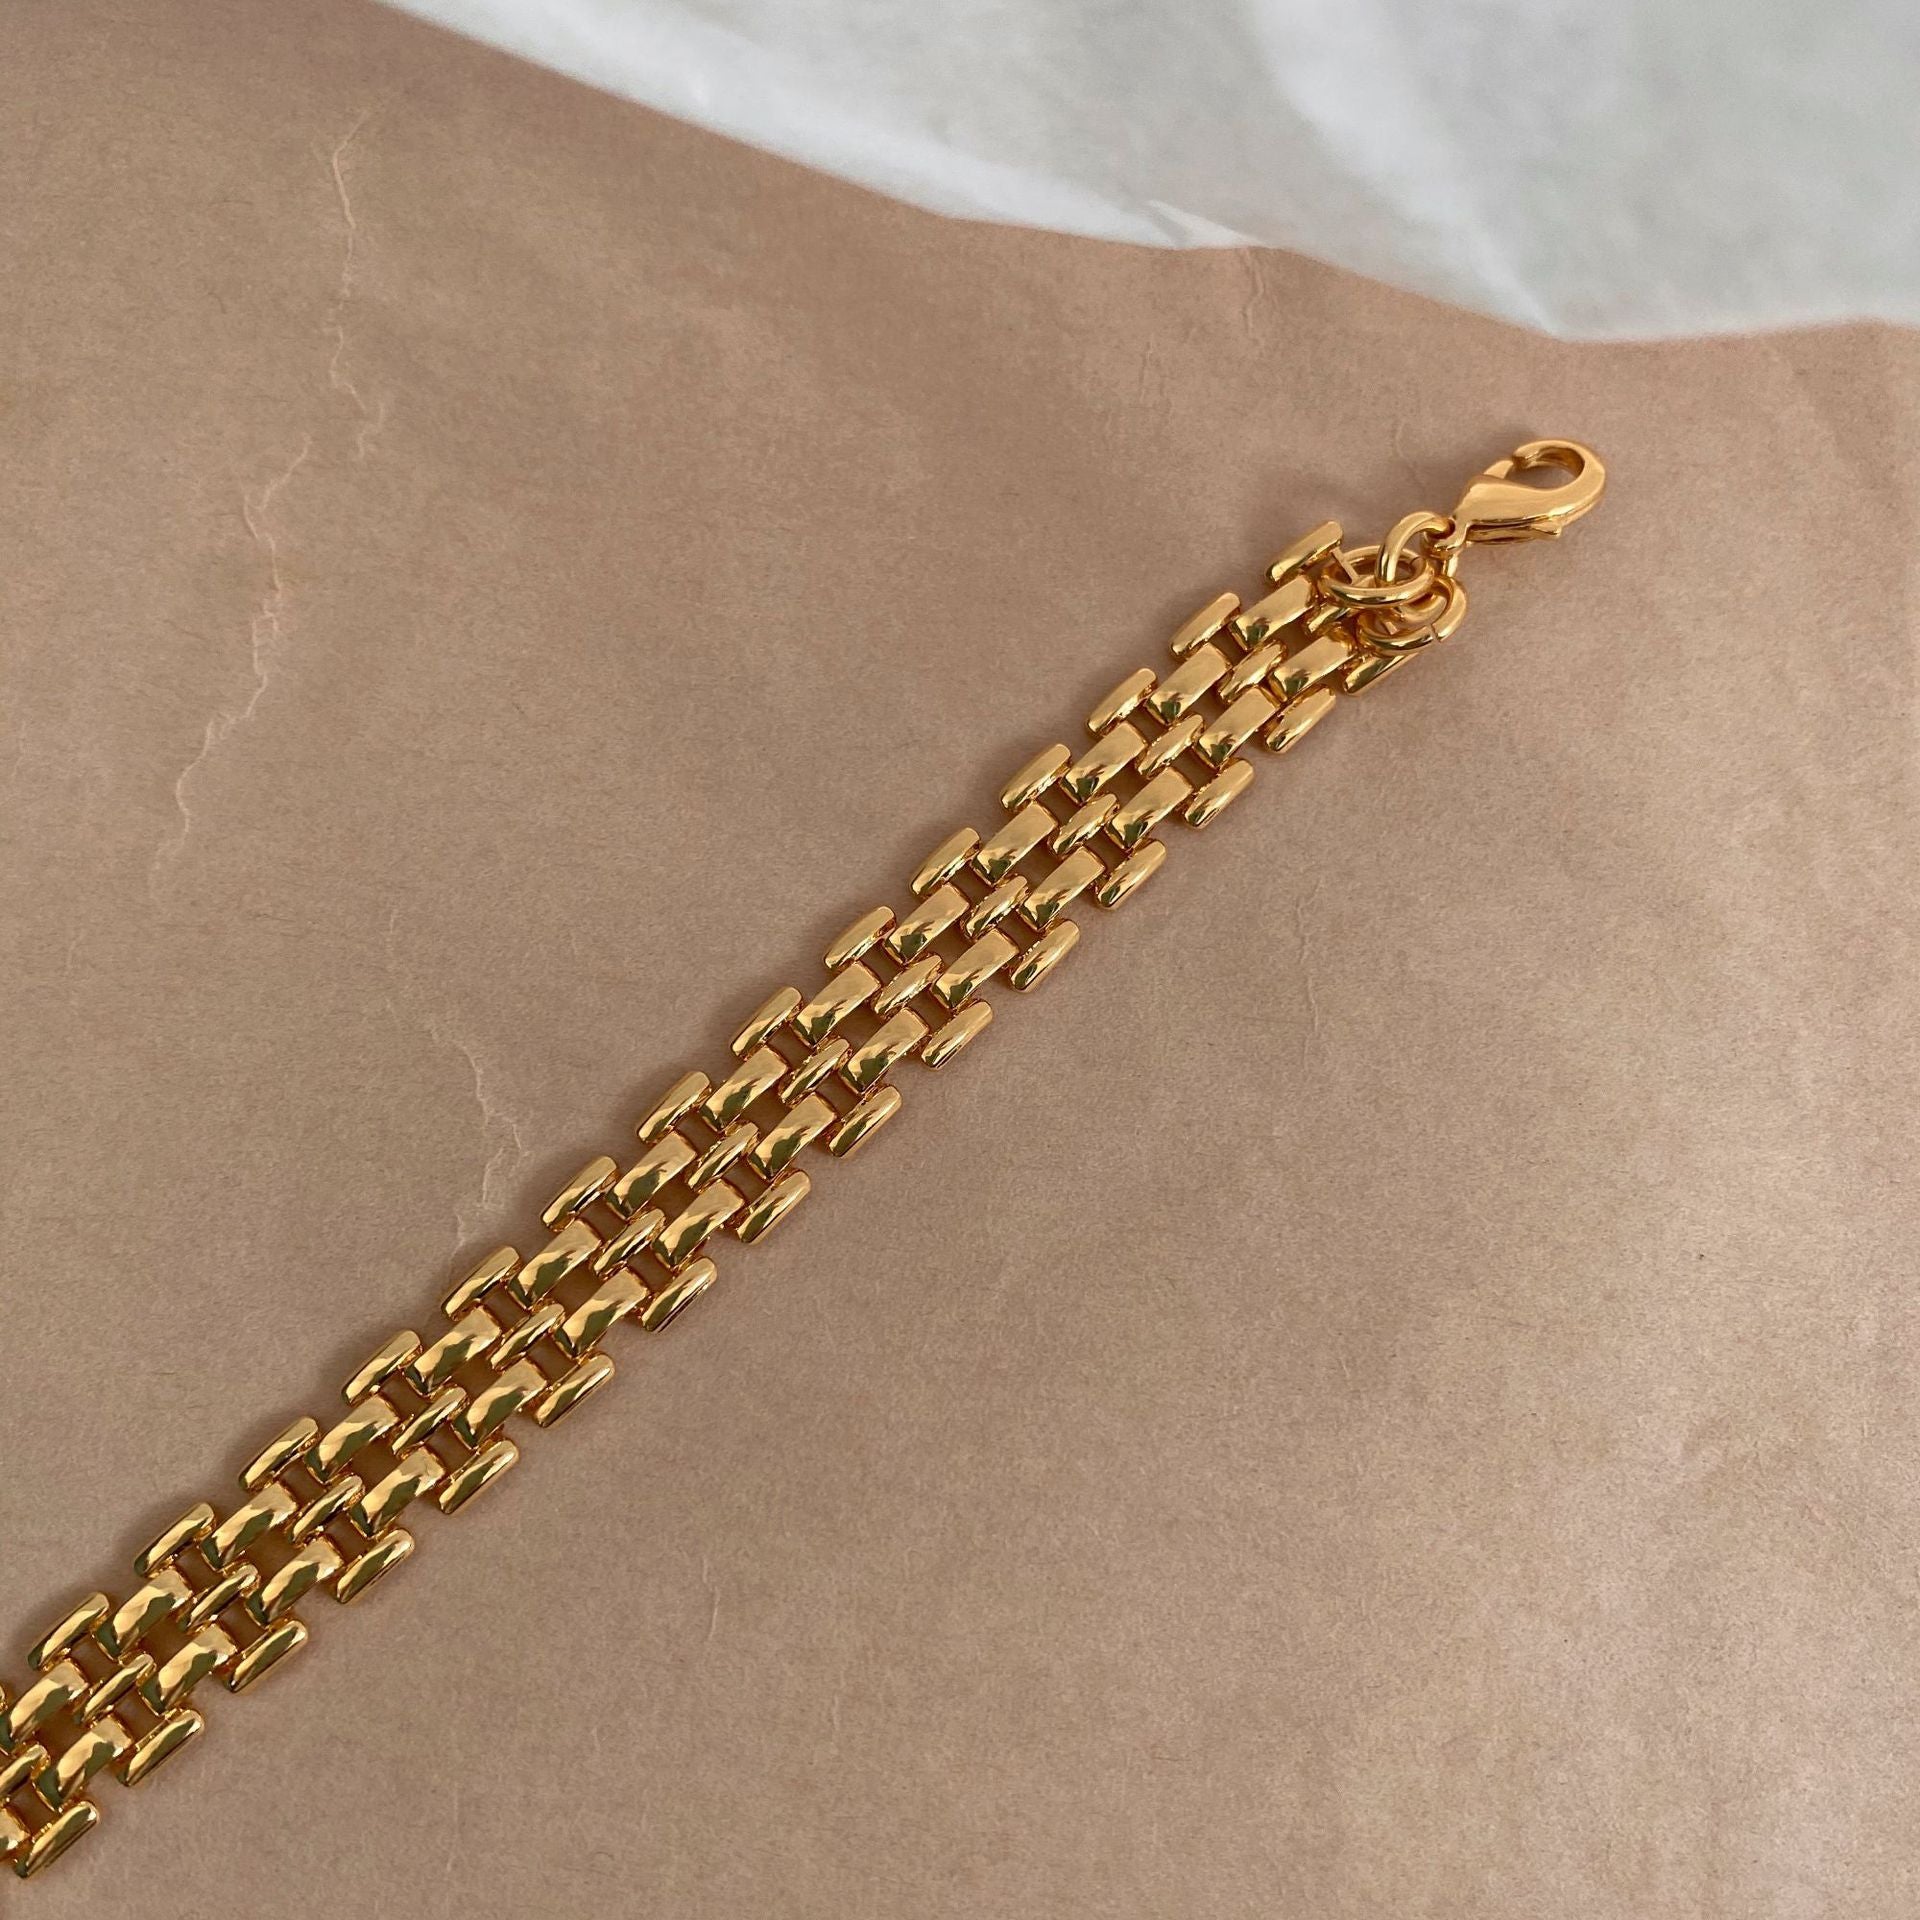 A women's Vintage Gate chain bracelet and Necklace as a travel souvenir on a piece of paper from Maramalive™.